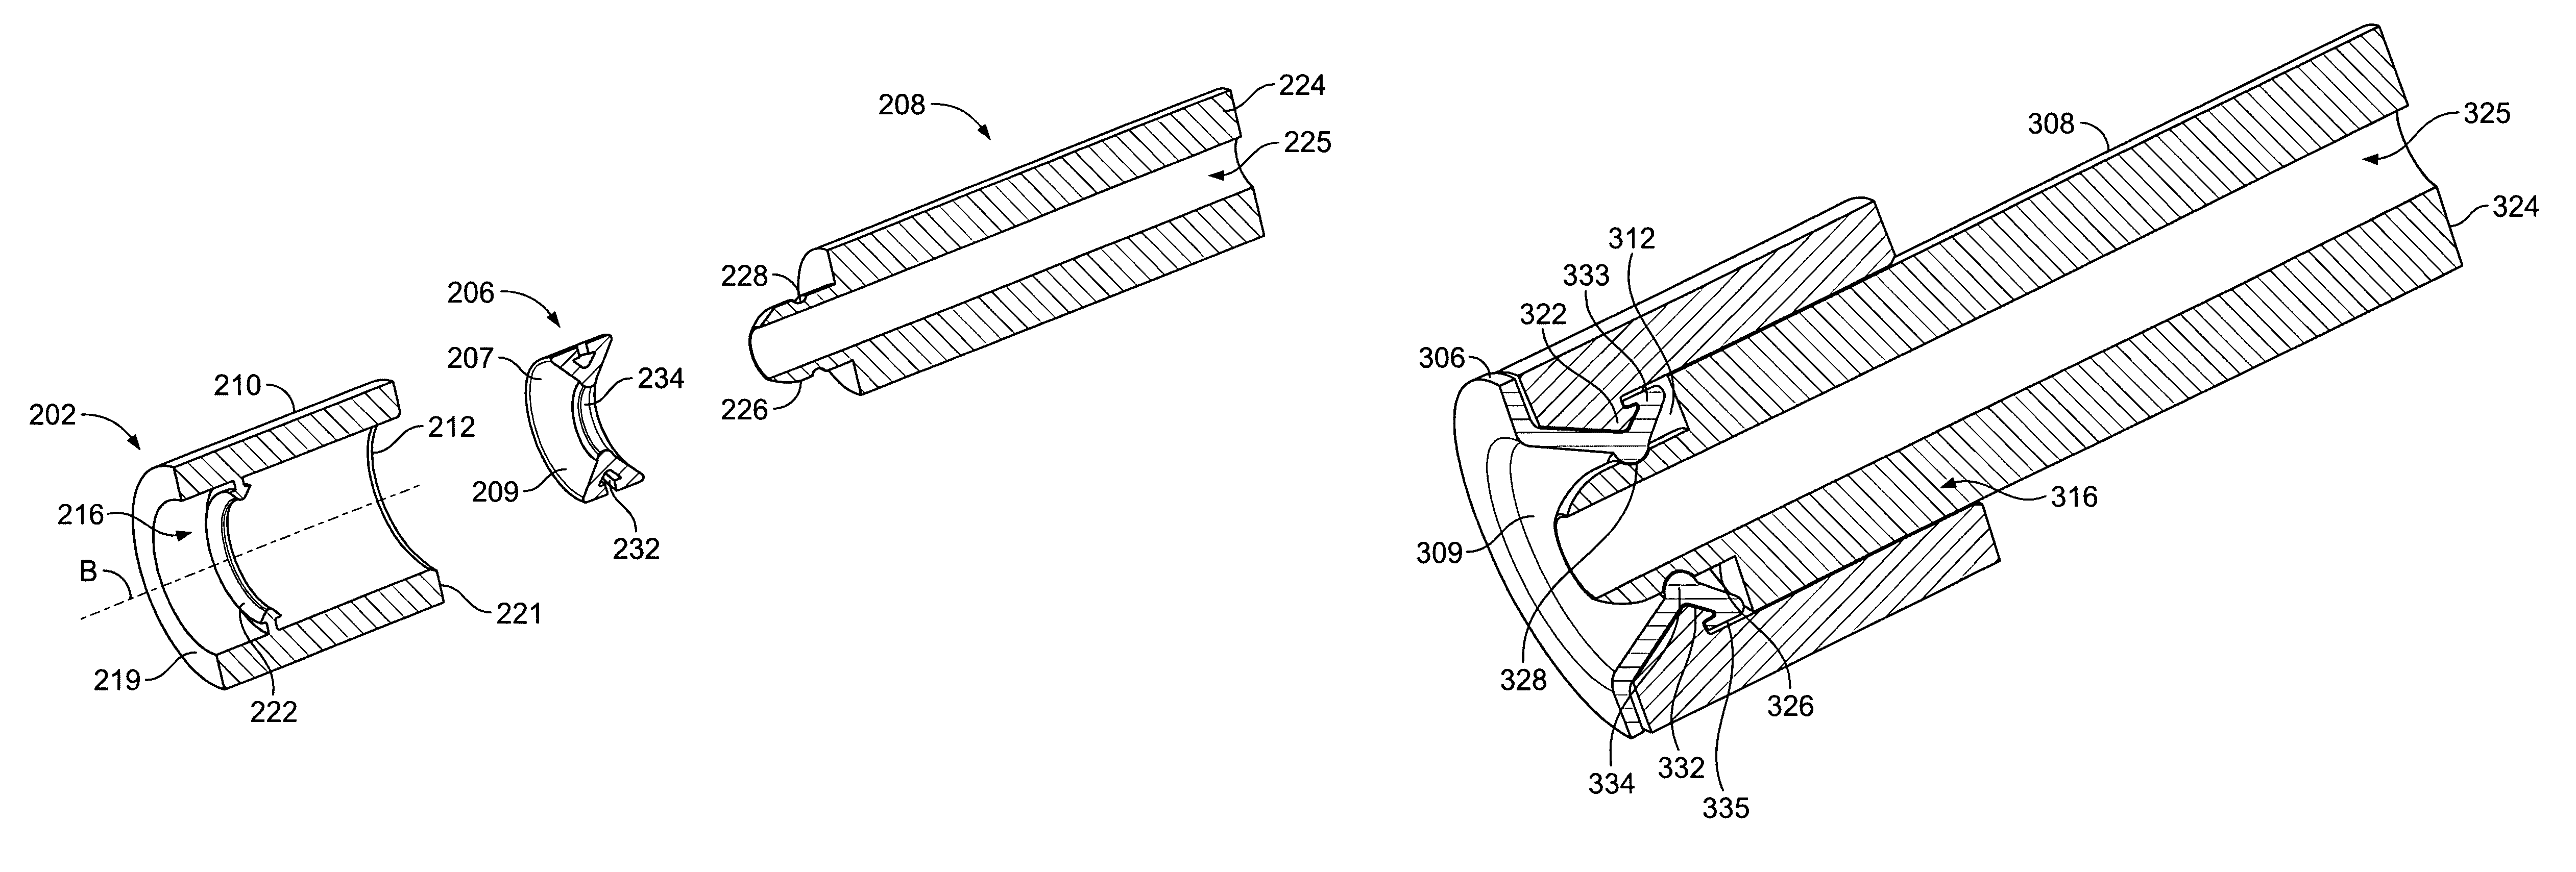 Tube connector with three part construction and latching component